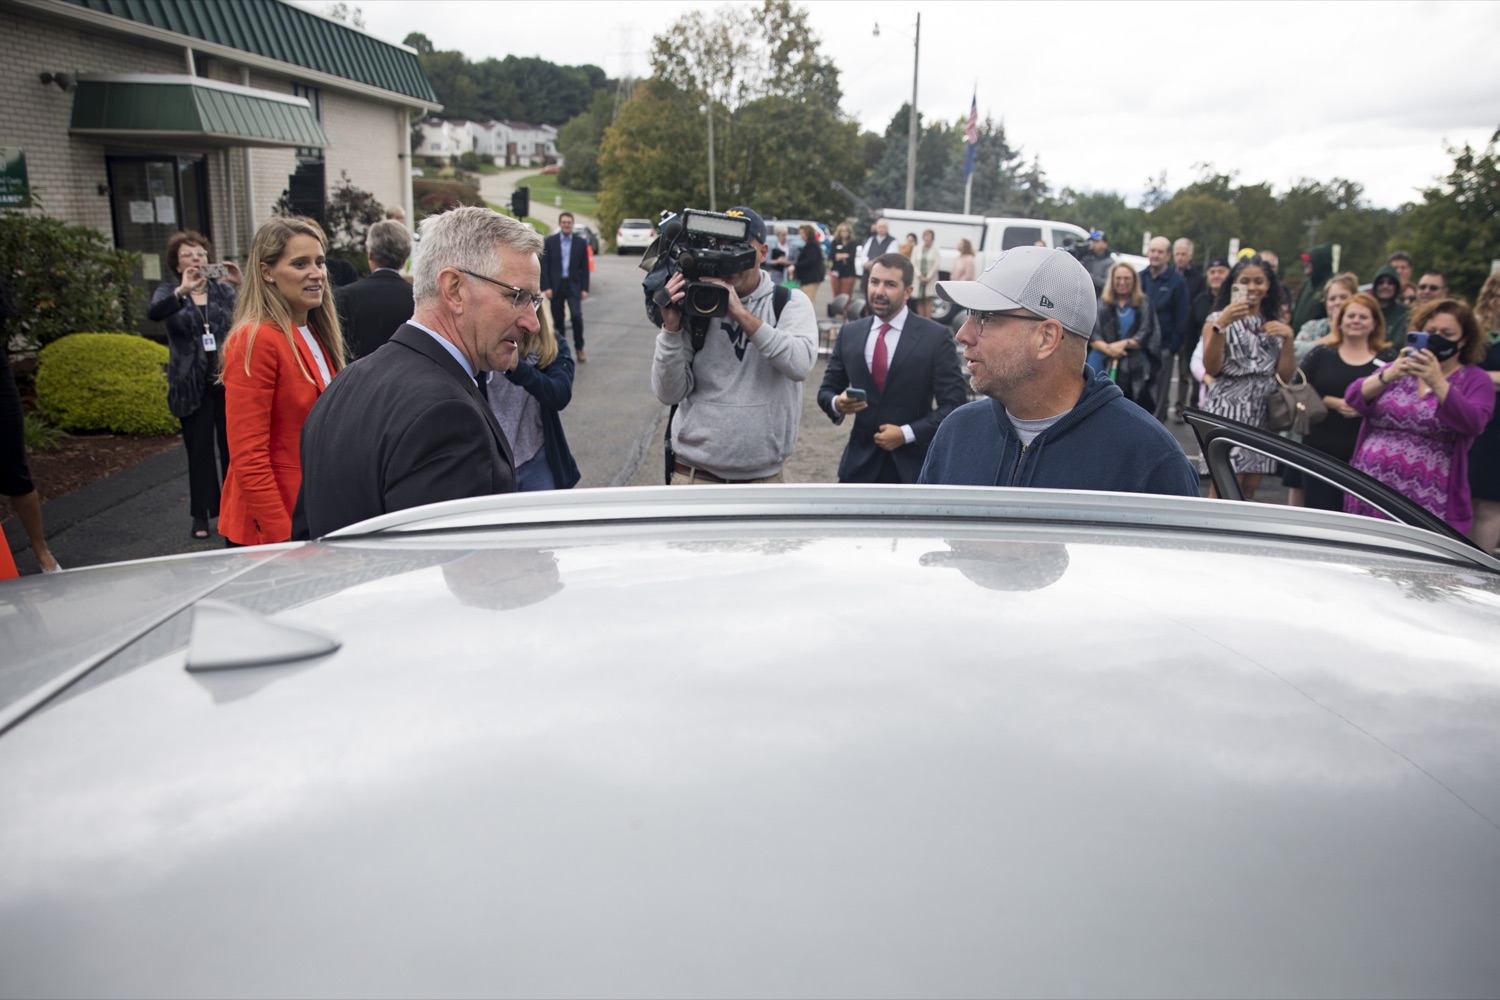 Department of Agriculture Secretary Russell Redding shakes hands with DoorDash delivery driver Dean Ely, in Delmont, PA on September 23, 2021.<br><a href="https://filesource.amperwave.net/commonwealthofpa/photo/19091_ag_doordash_cz_08.jpg" target="_blank">⇣ Download Photo</a>